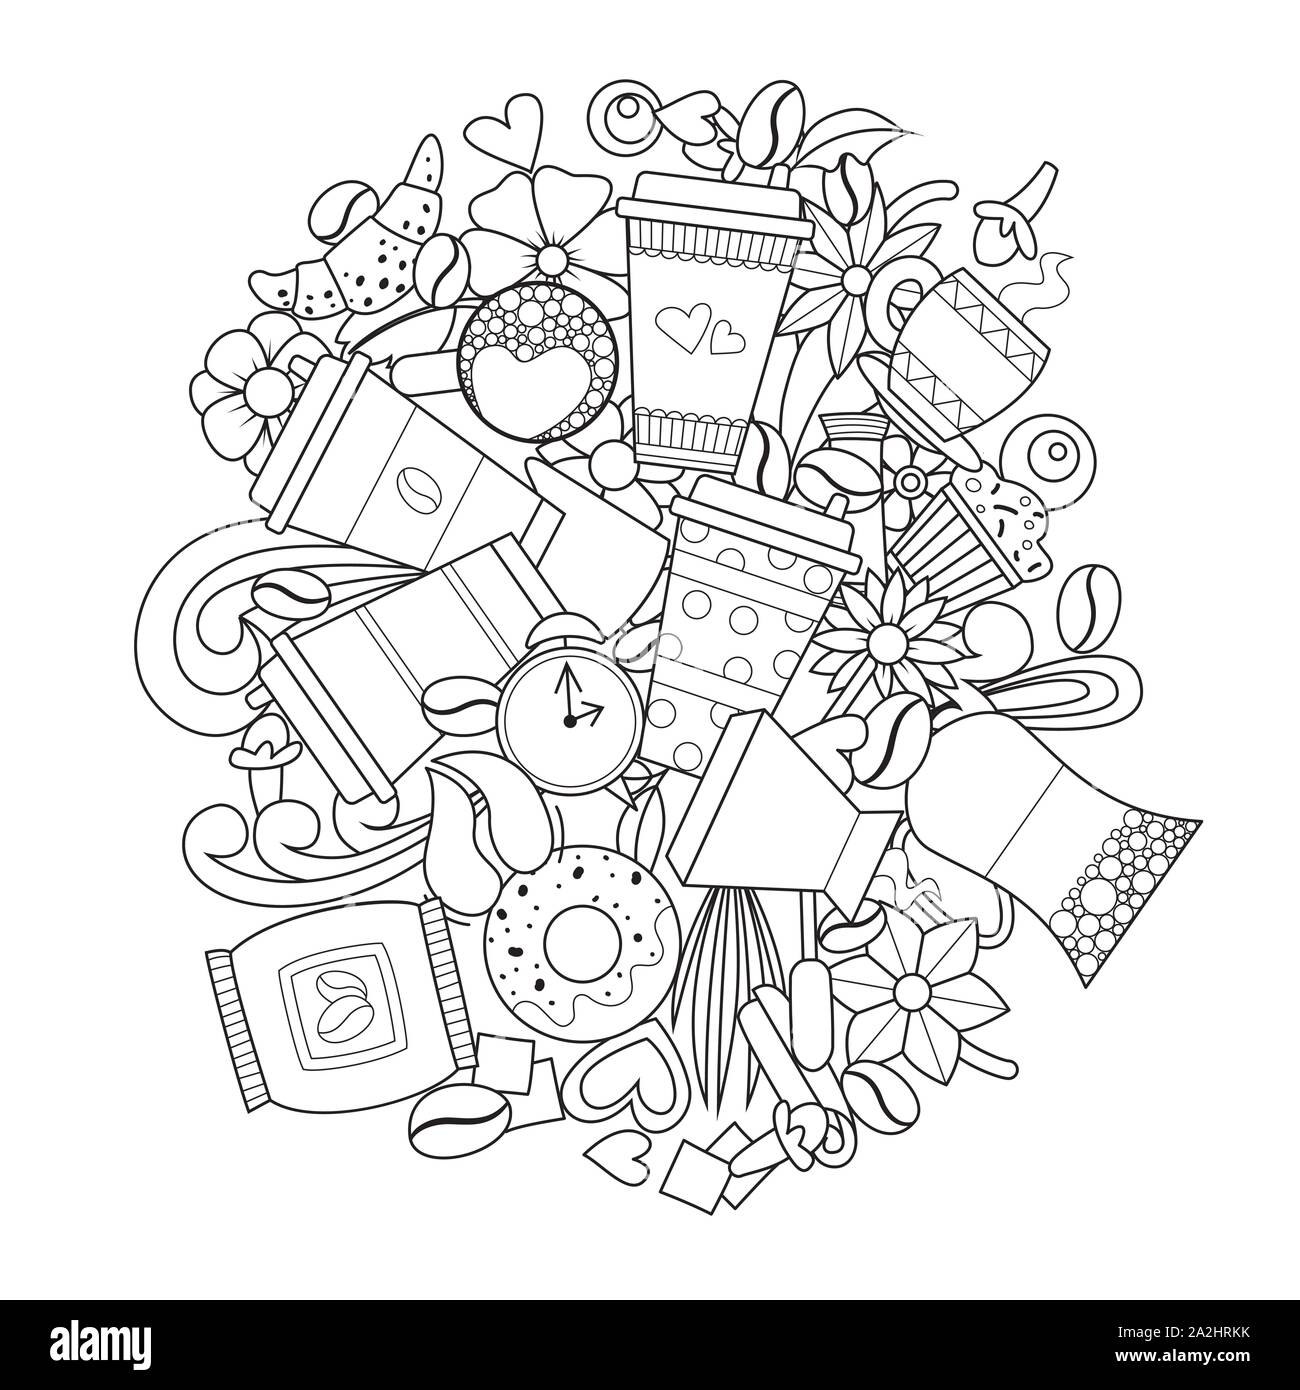 Doodle coffee. Vector illustration. Takeout beverage. Coloring book cafe design Stock Vector